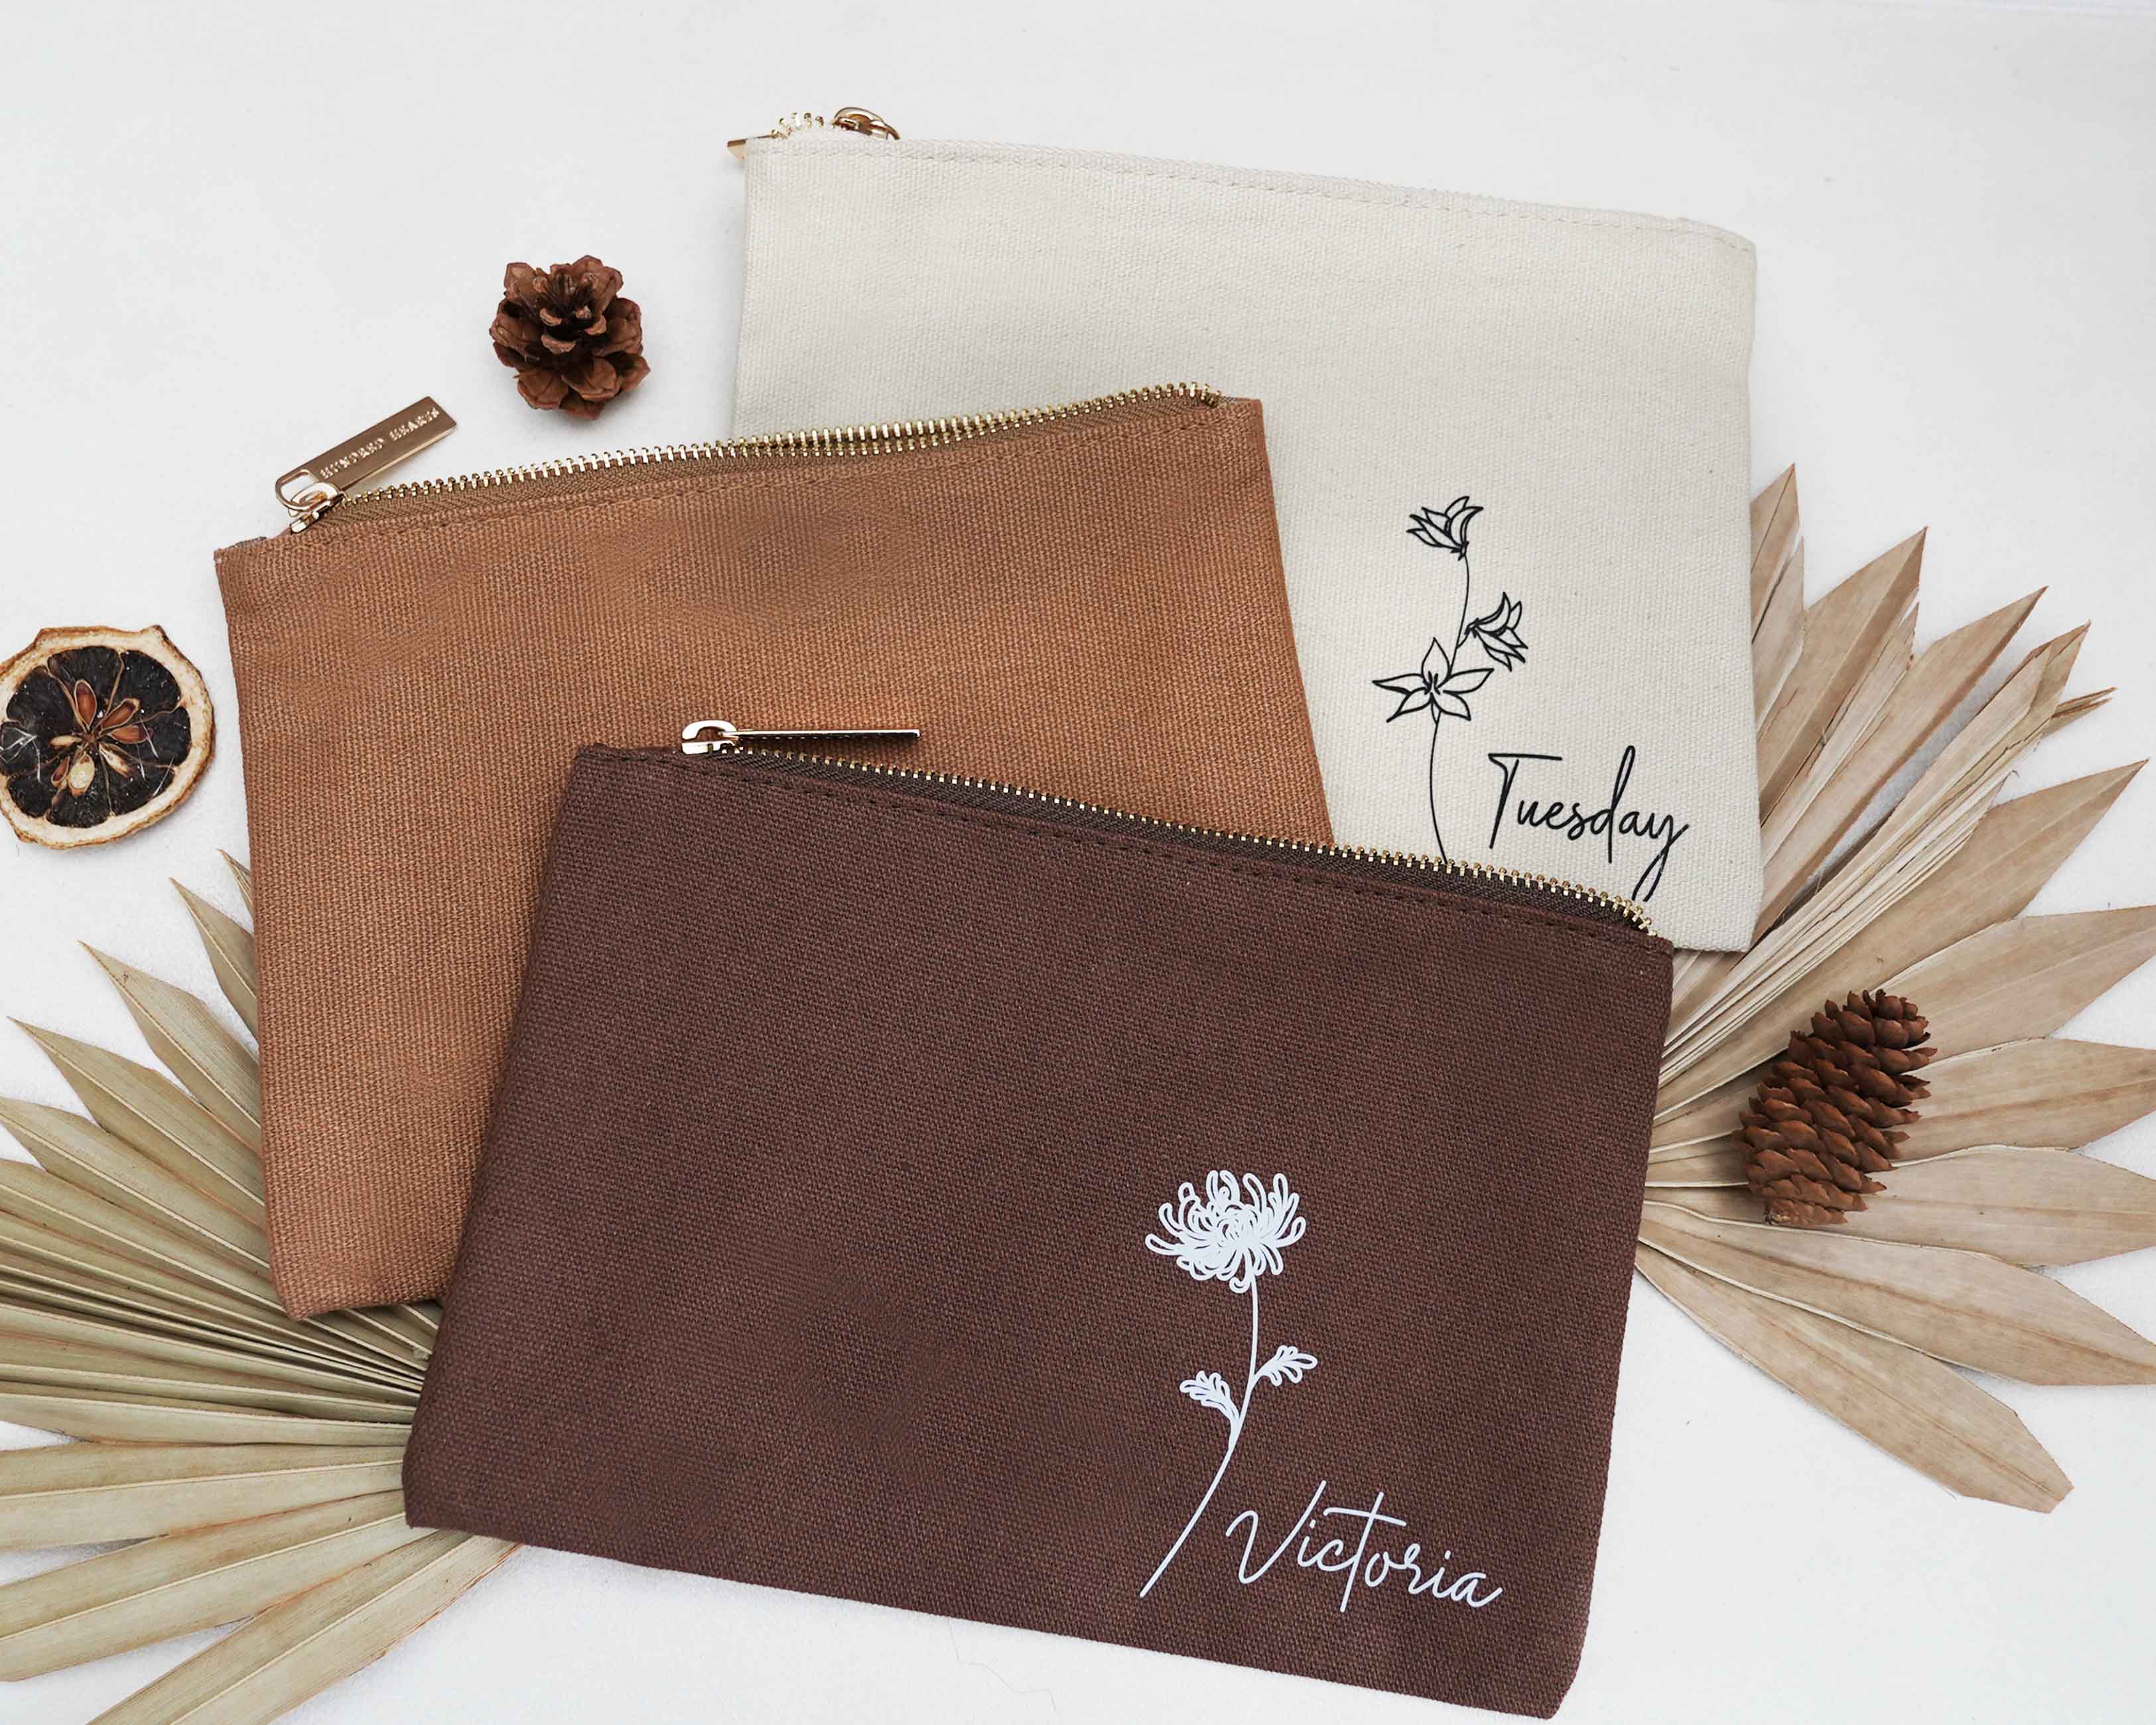 Espresso, caramel and oat Personalized Cosmetic Bags with birth flower image and name.